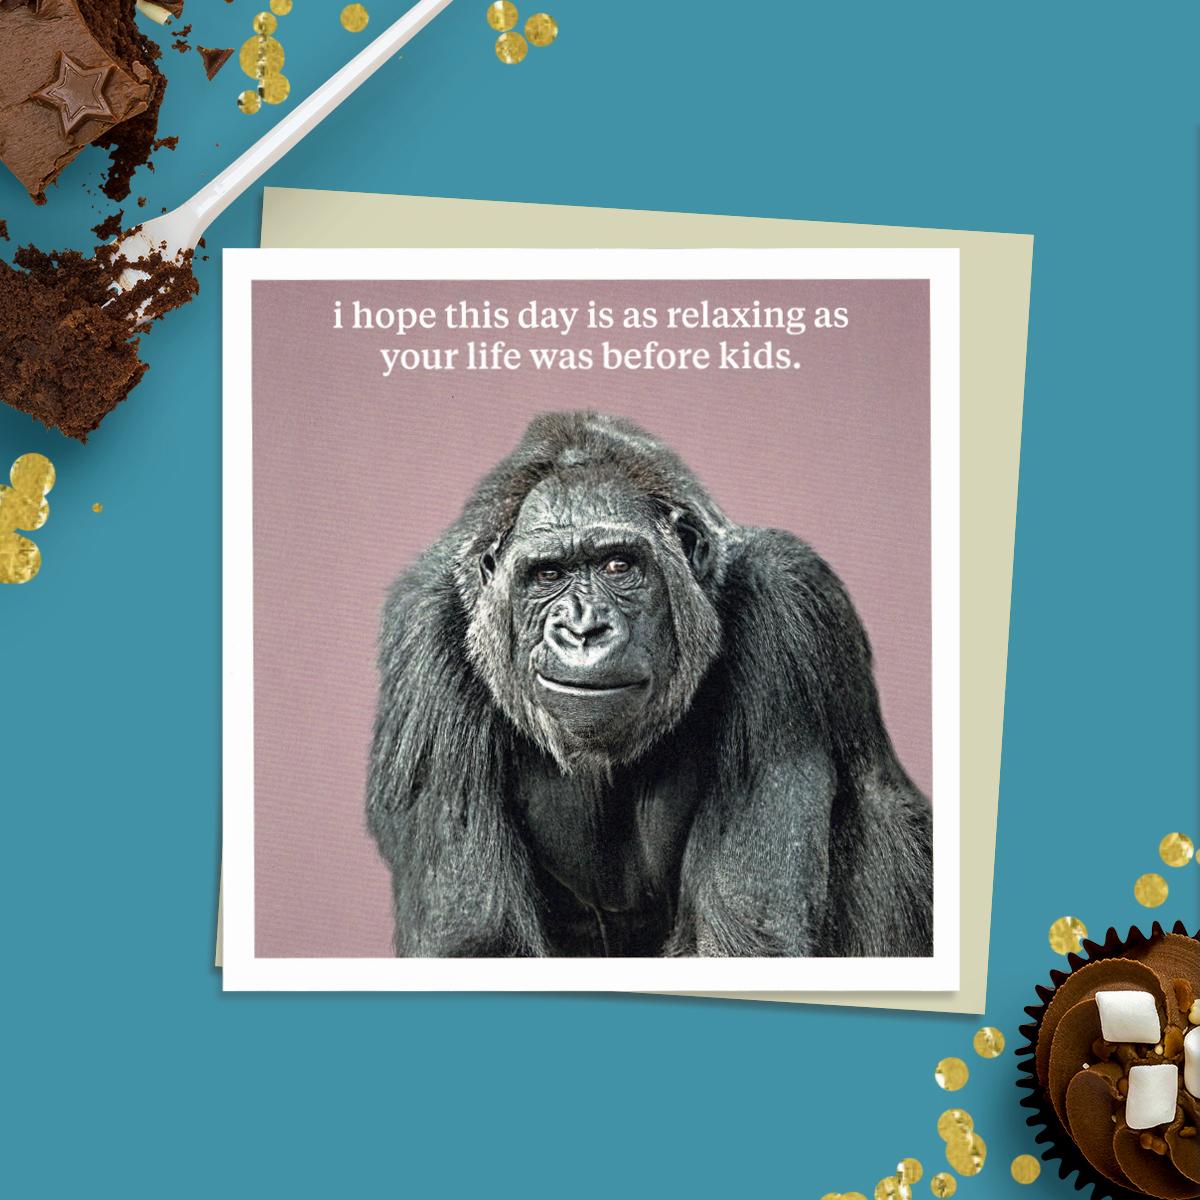 To The Point Humorous Photographic Card Showing A Gorilla With The Caption: ' i hope this day is as relaxing as your life was before kids' Blank Inside For Own message. Complete With Stone Coloured Envelope